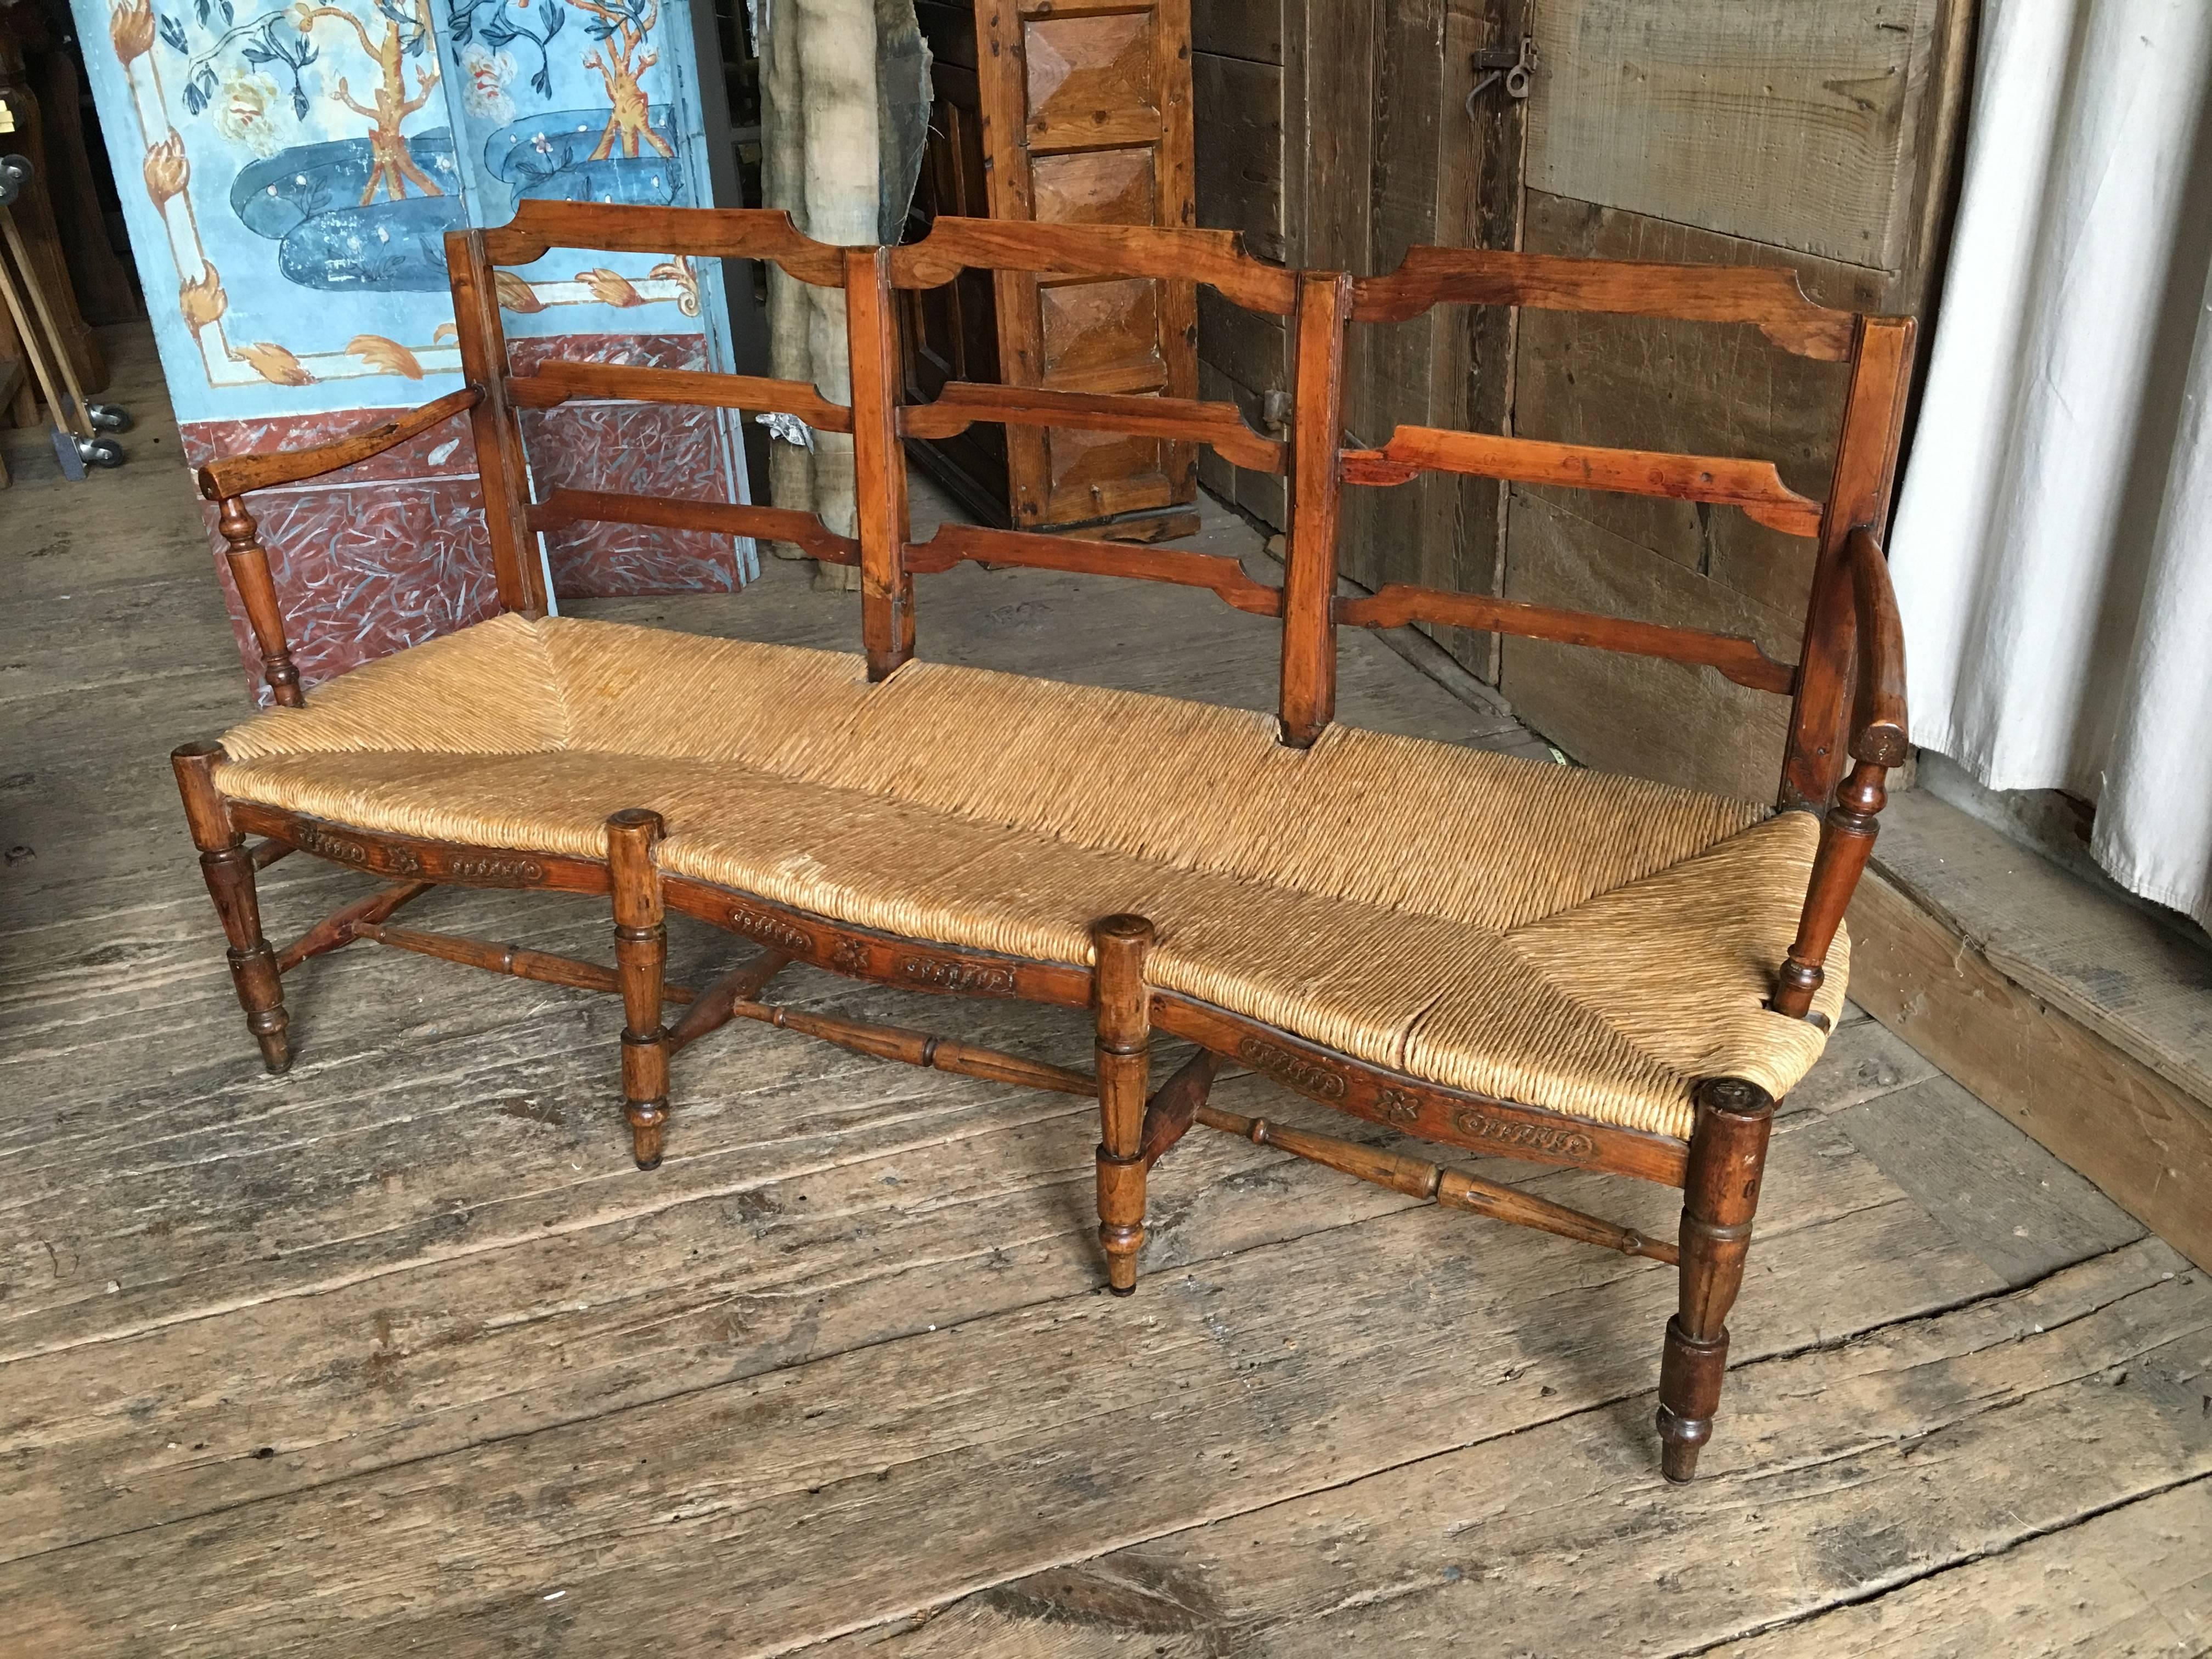 An early 19th century French rush-seat banquette in fruitwood, circa 1800. The back is a simple stylized ladder-back with carved arms supported by turned posts that terminate into the seat. The natural rush seat is supported on eight turned and